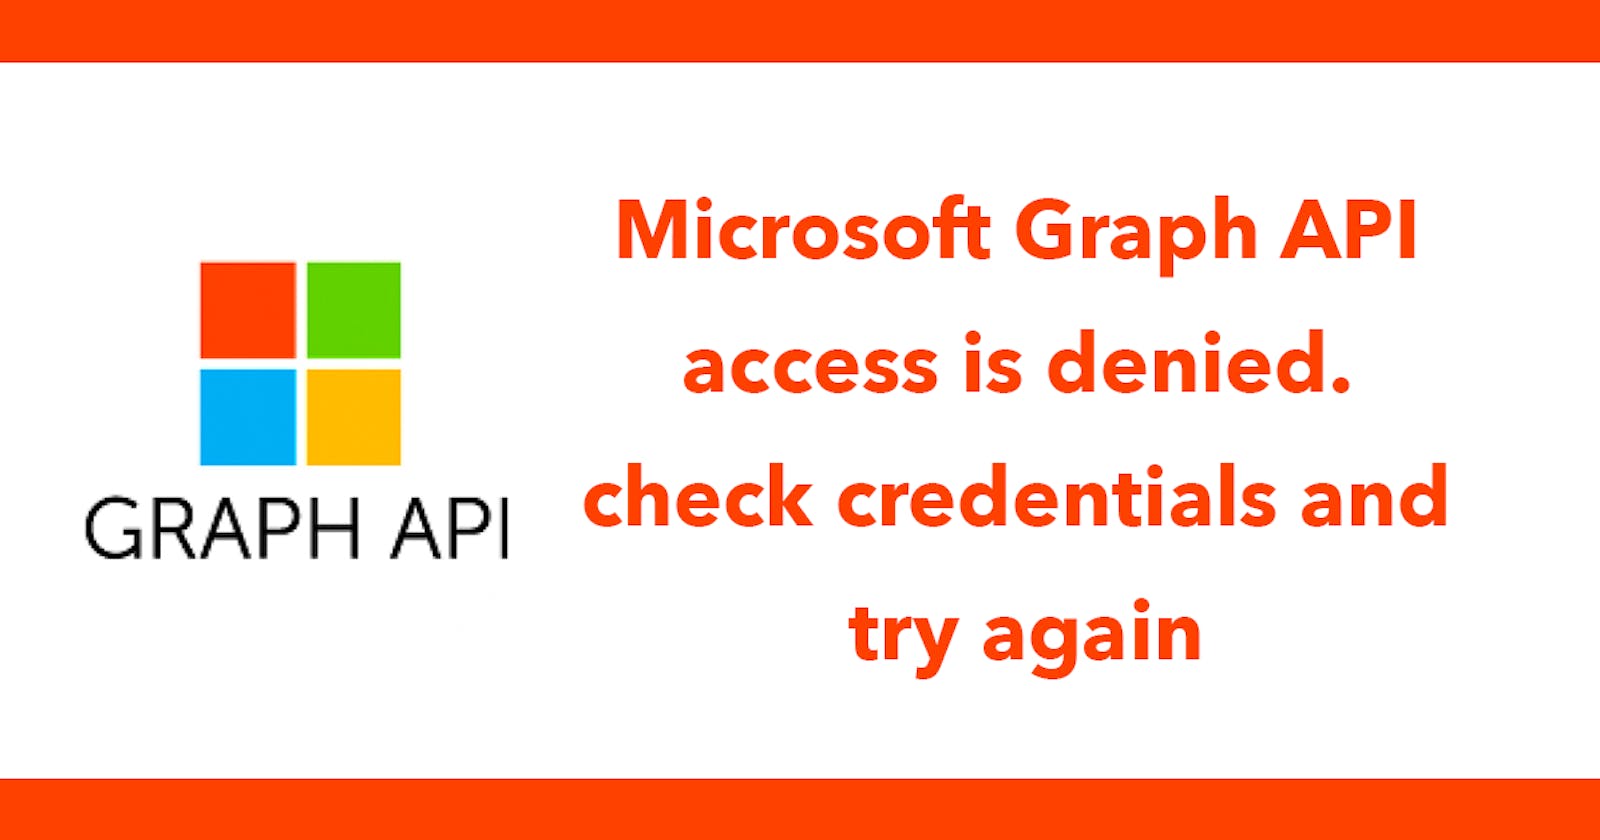 Microsoft Graph API access is denied. check credentials and try again